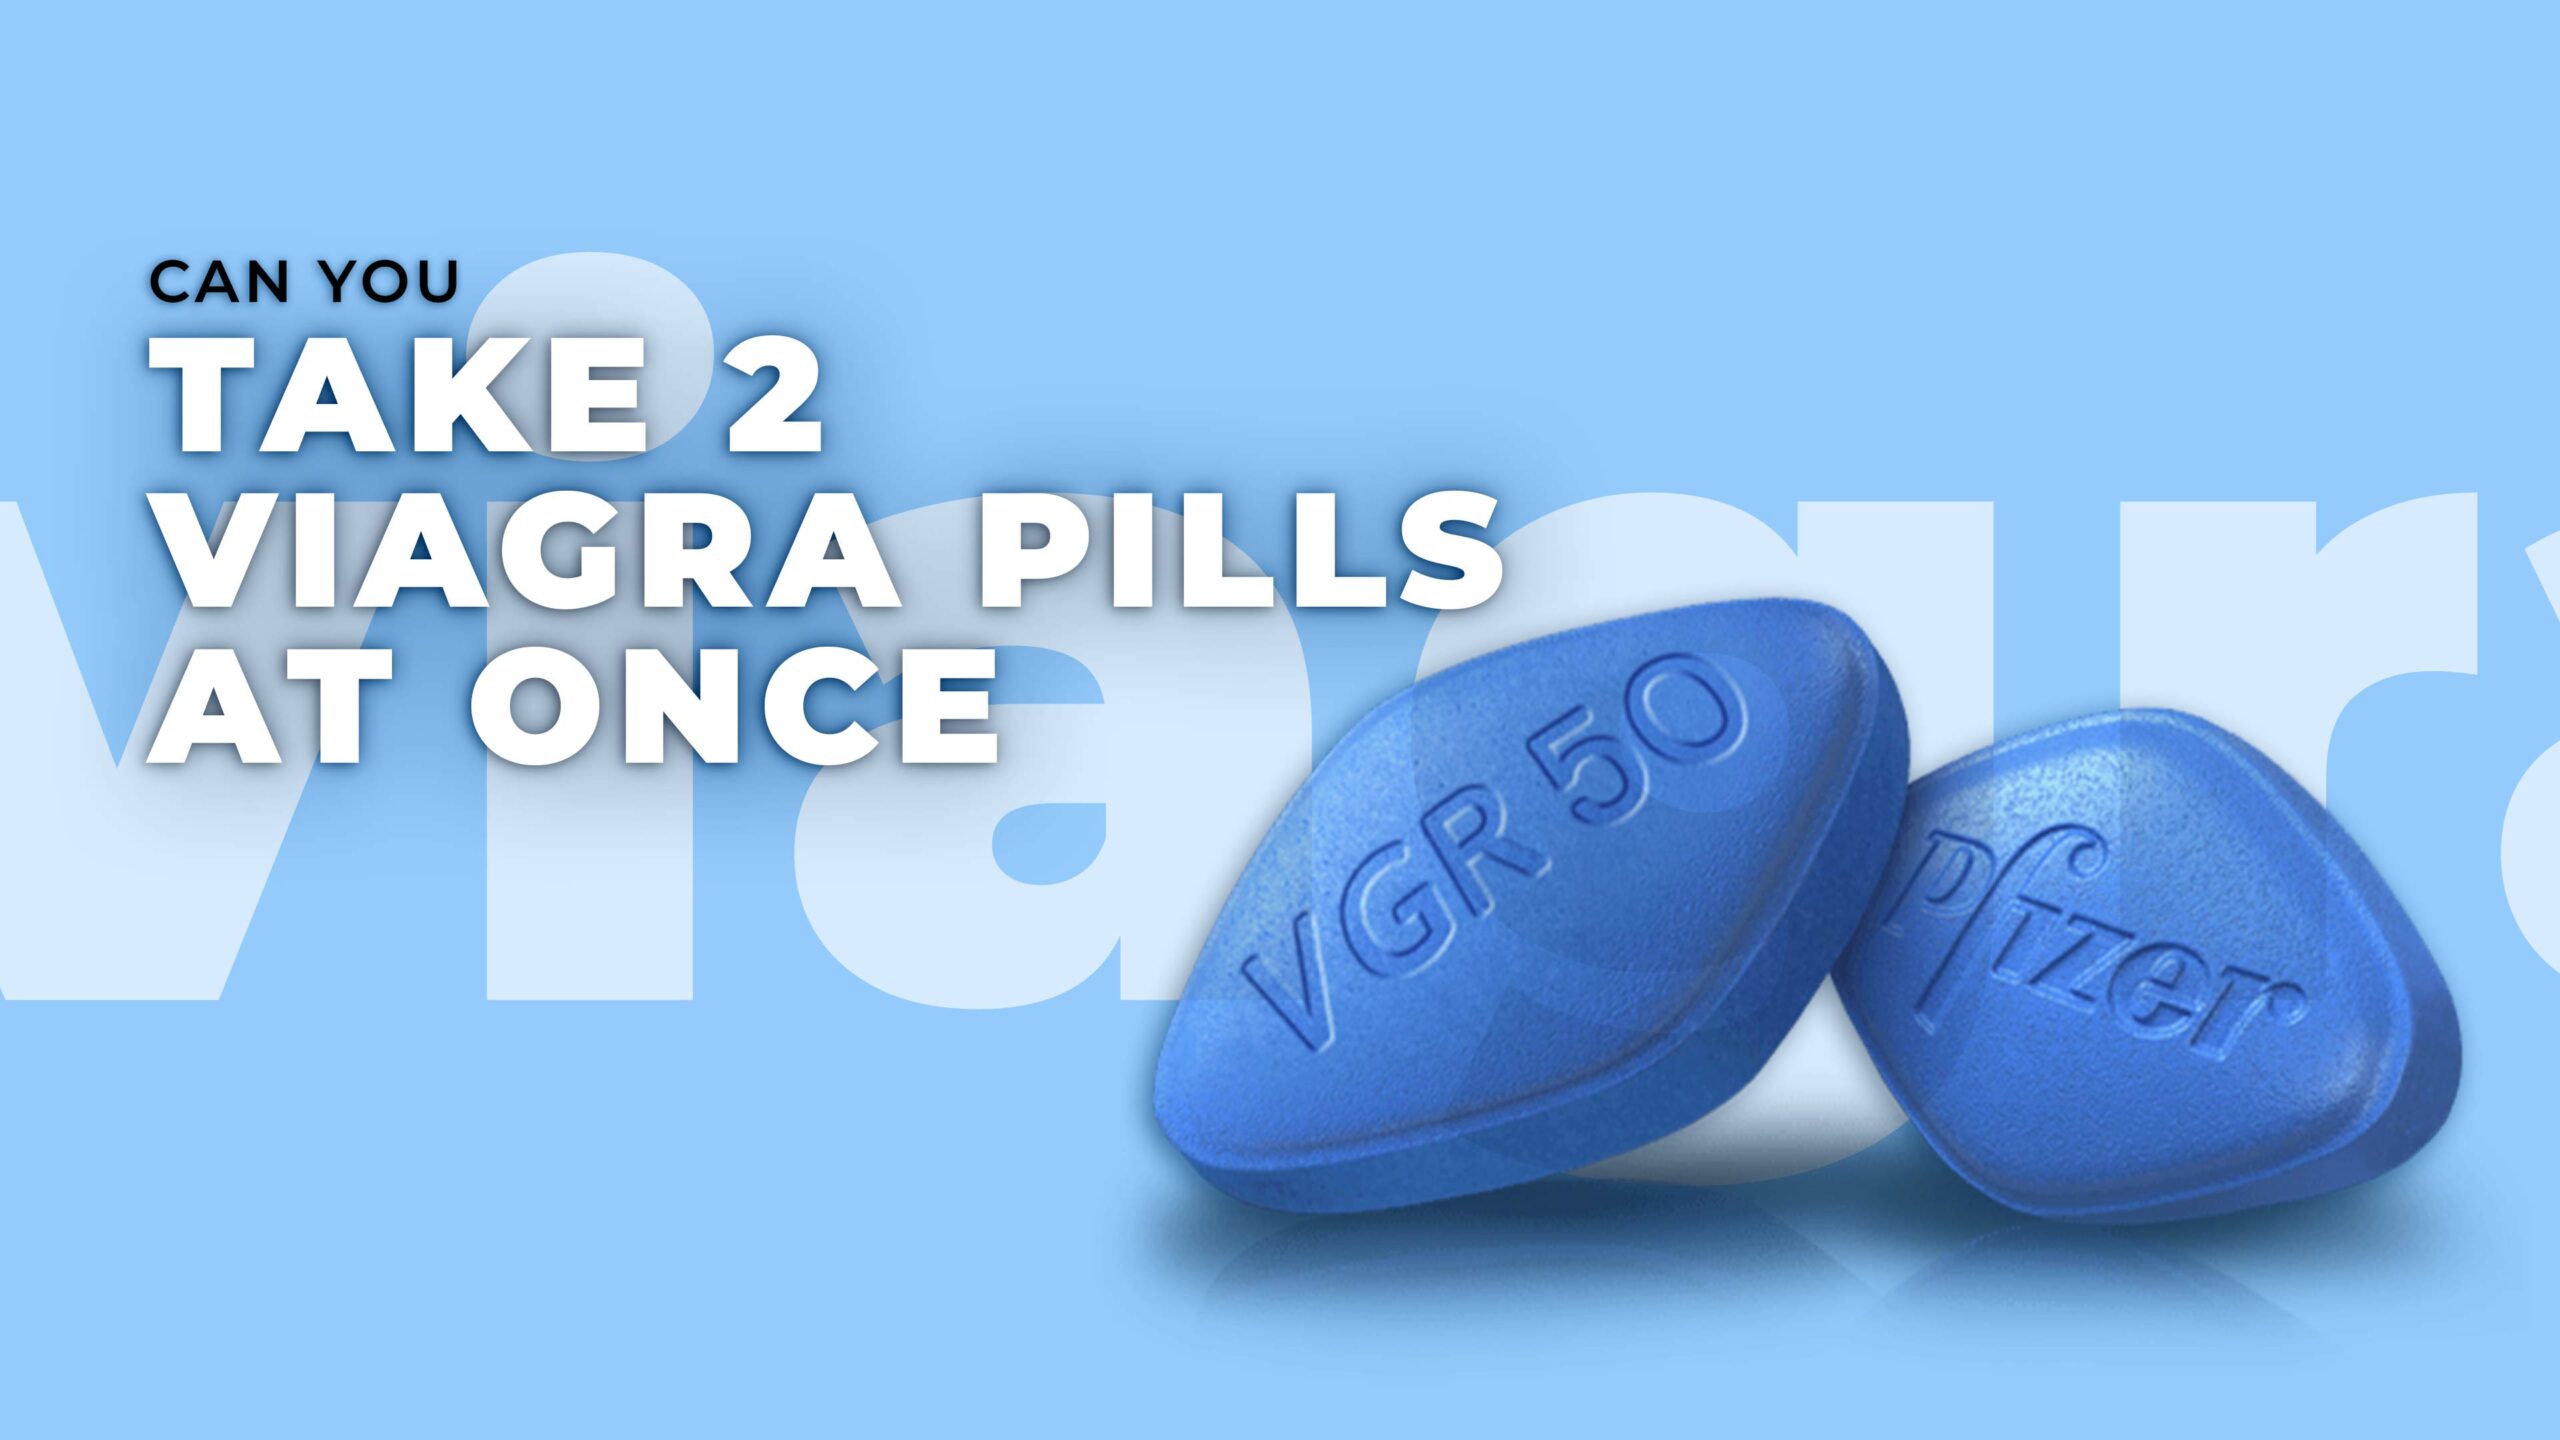 Can you take 2 viagra pills at once